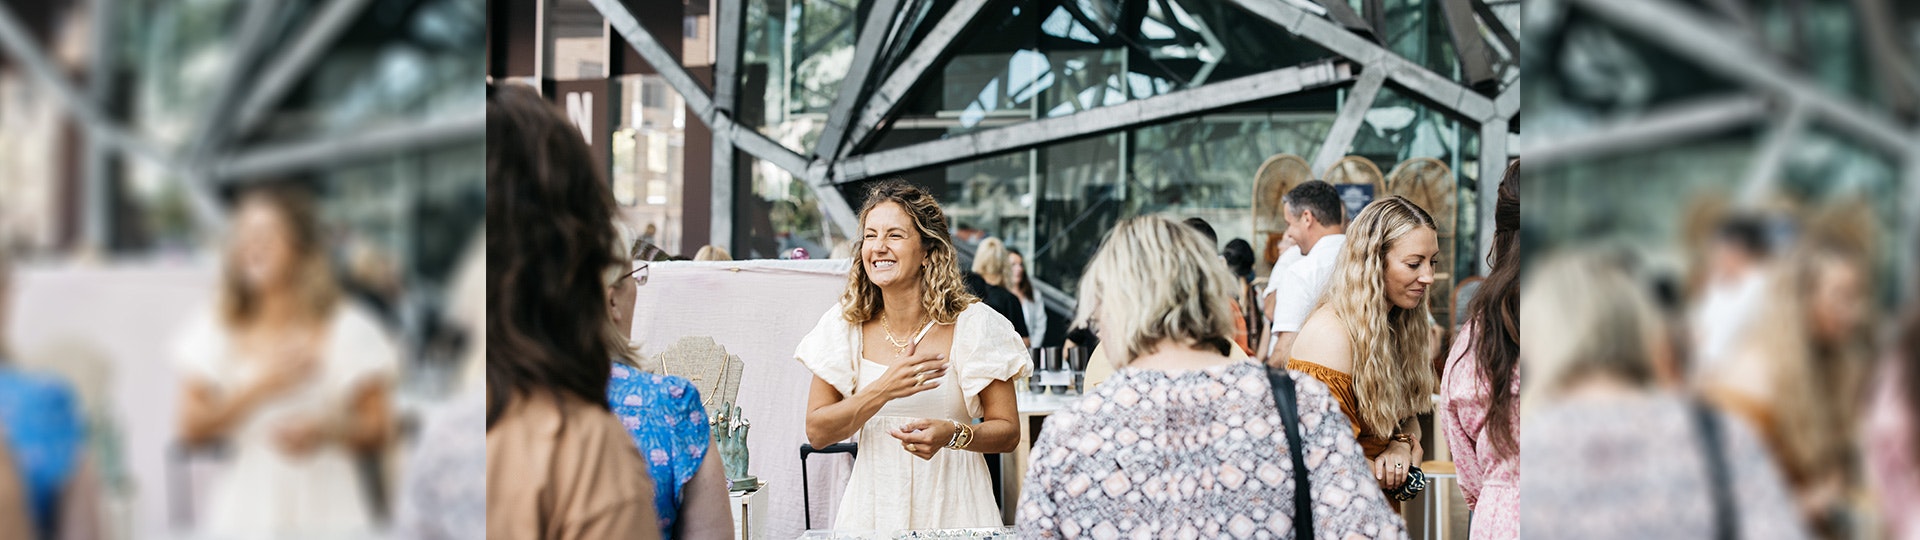 A stallholder at a market in The Atrium is grinning will speaking to a customer at their stall